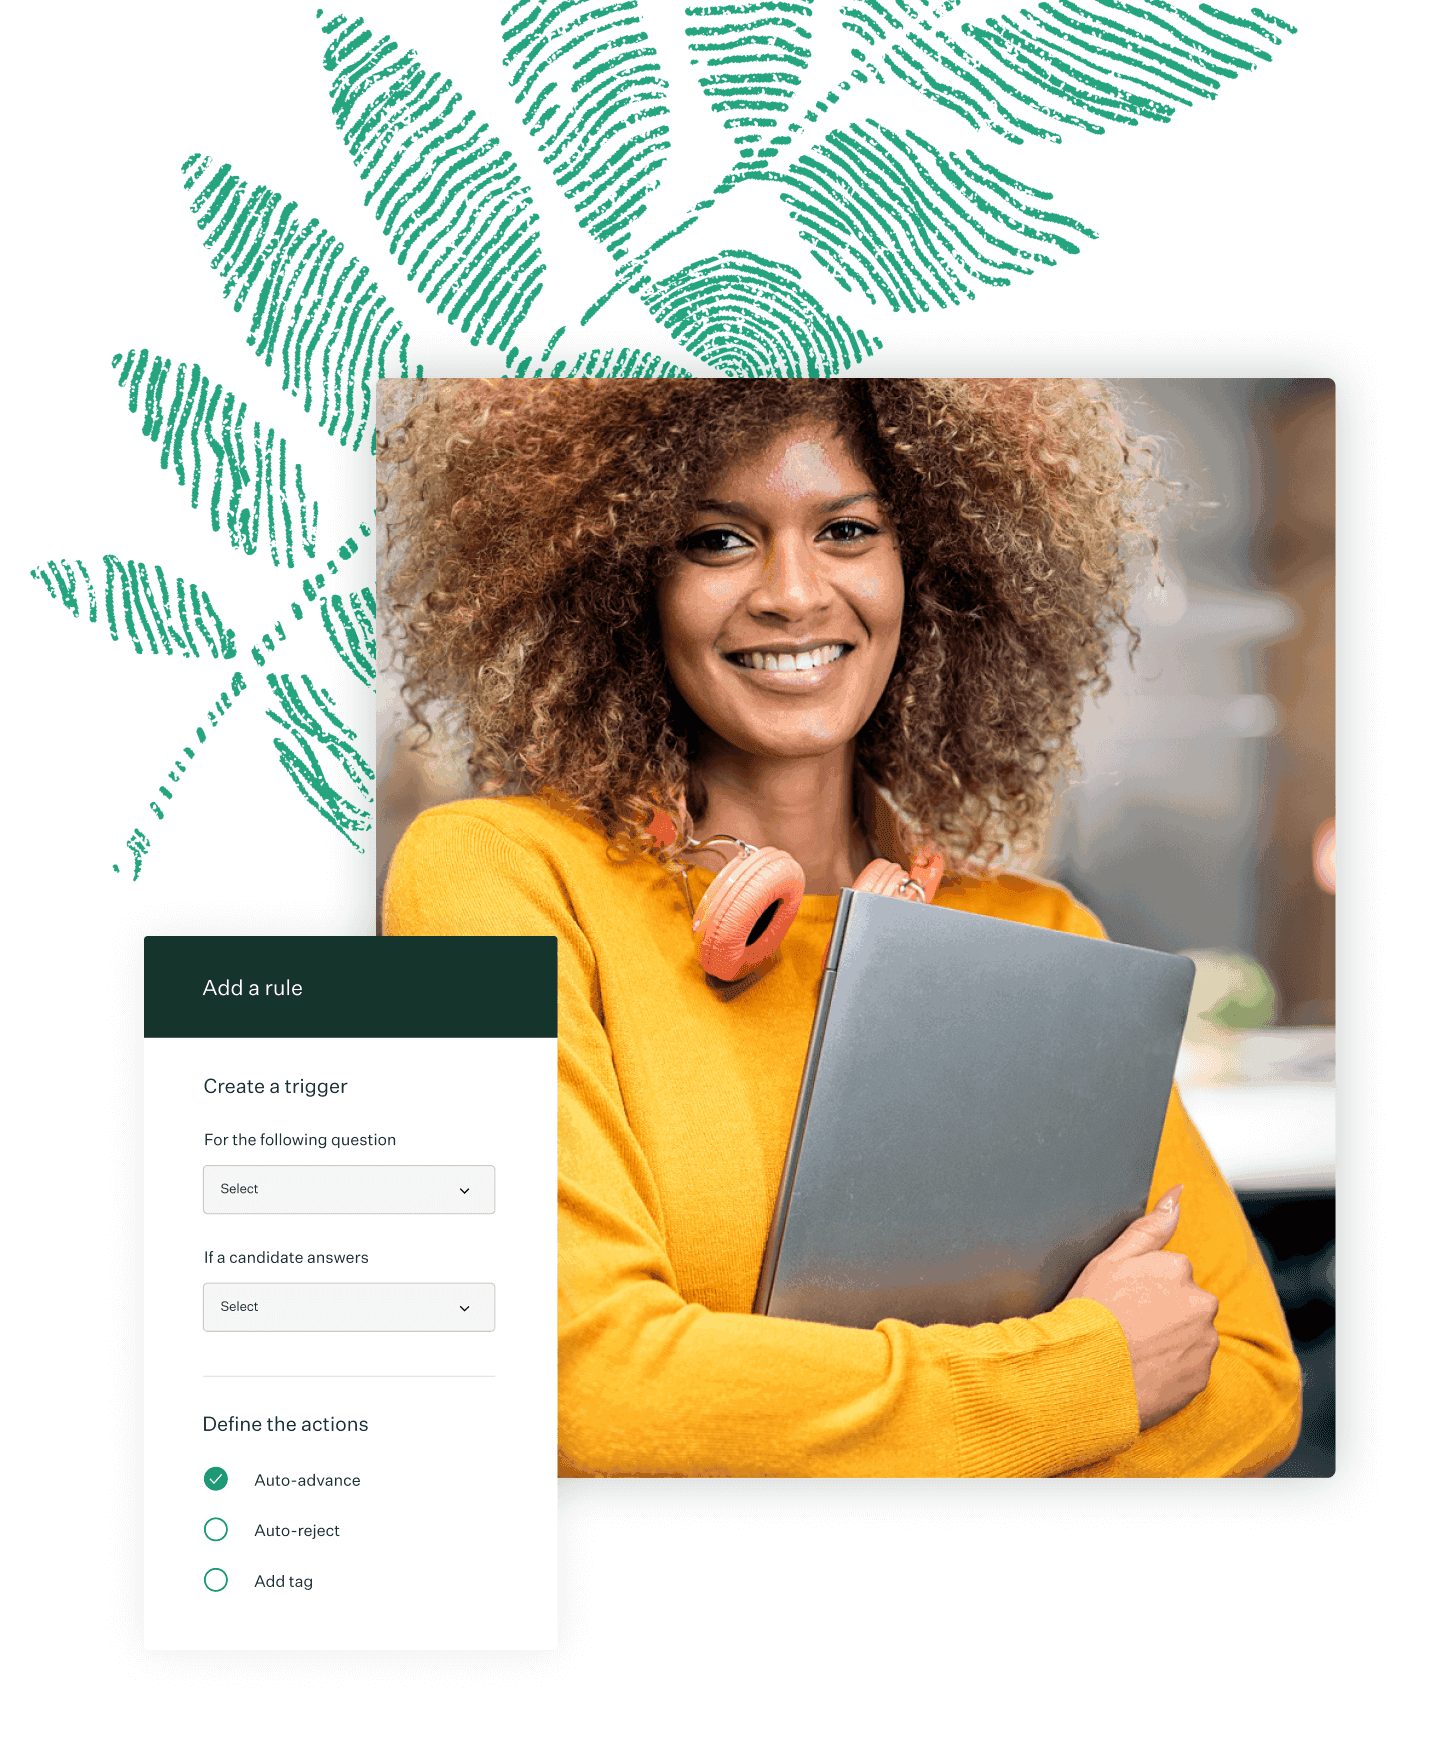 Image with Greenhouse product UI and a photo of a woman holding a laptop